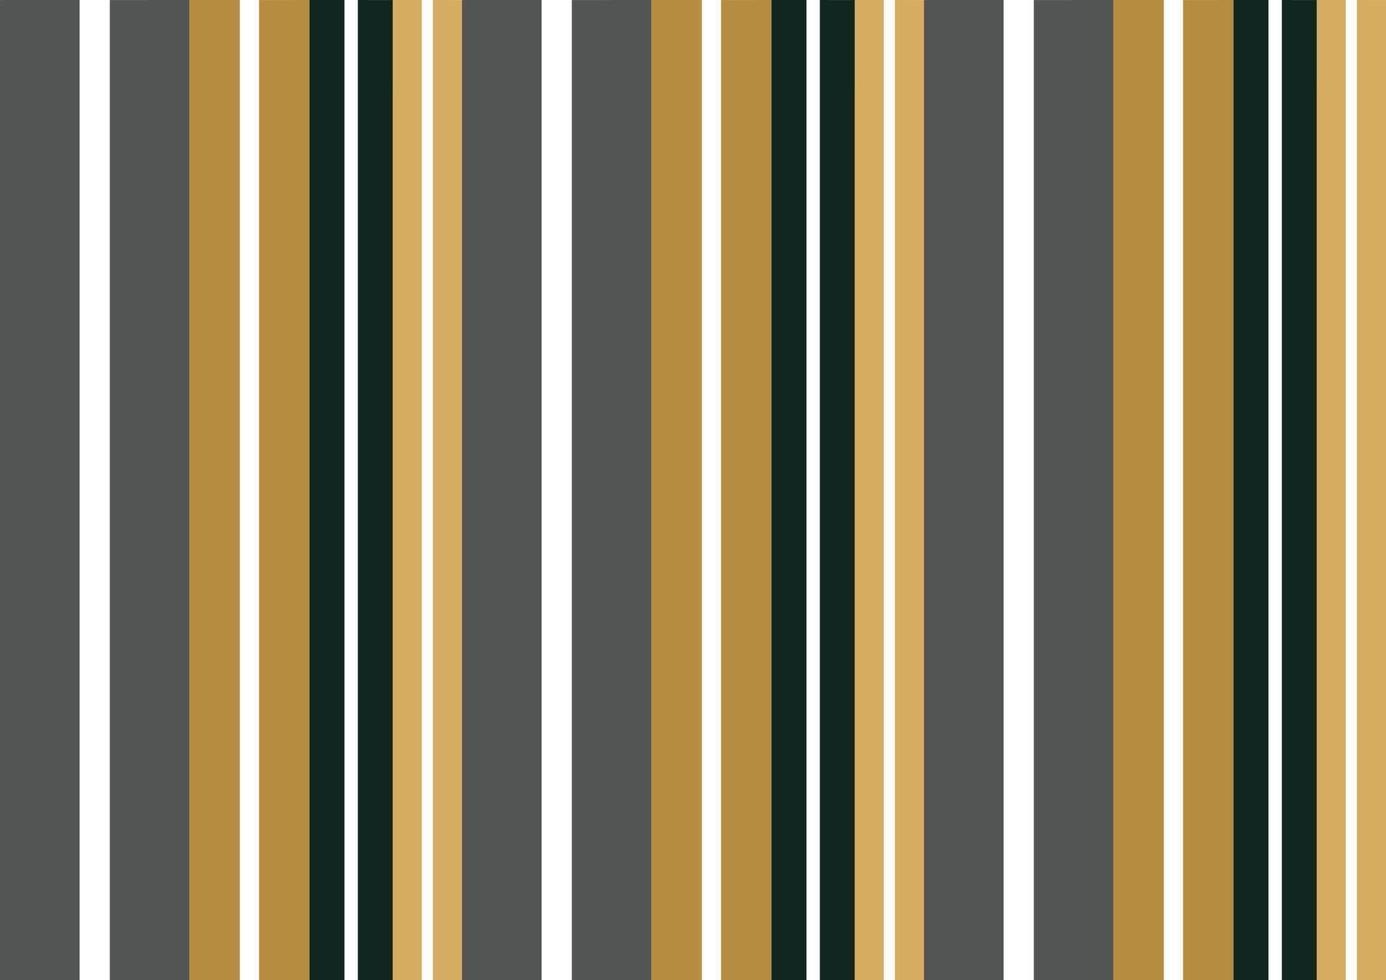 Barcode Stripes pattern seamless fabric prints A stripe pattern consisting of bright, multicoloured contrasting vertical stripes which can range in thickness. vector